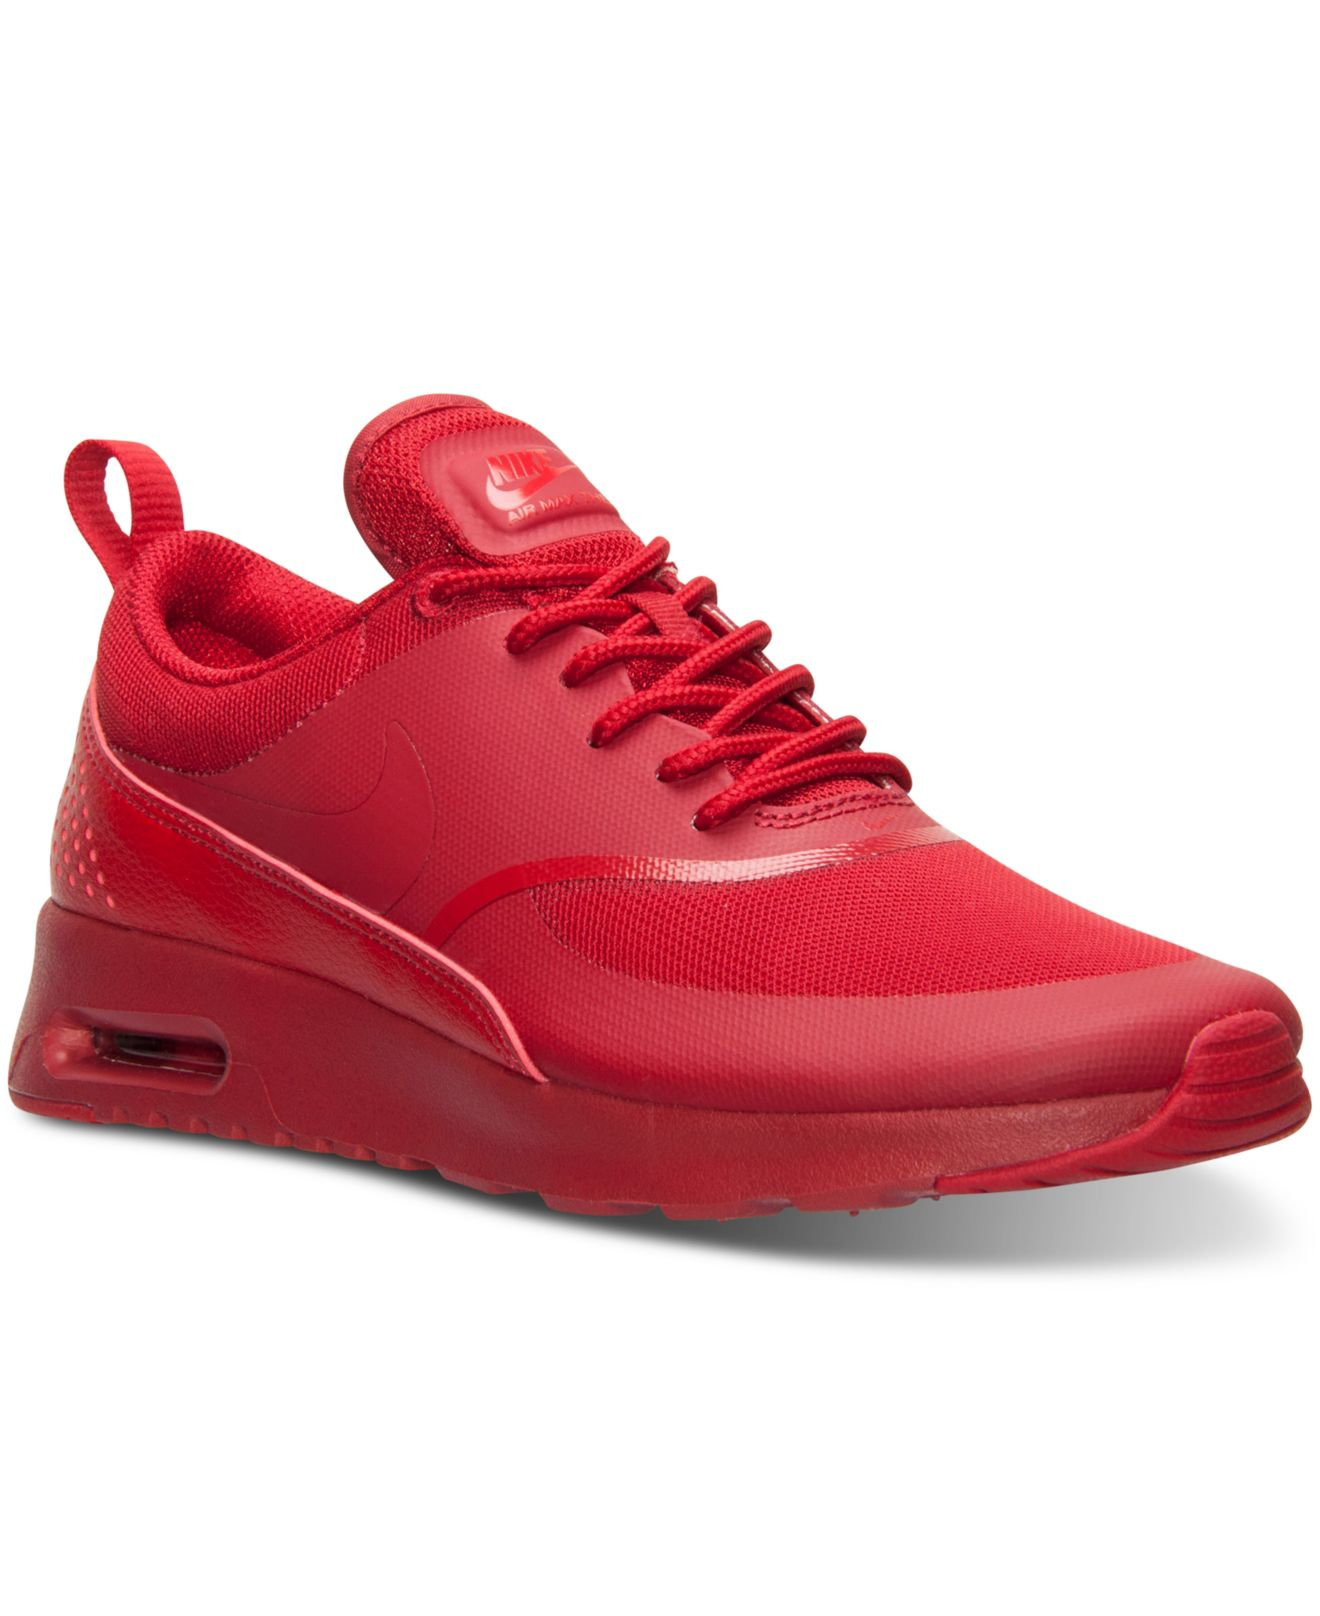 Nike Women's Air Max Thea Running Sneakers From Finish Line in Red - Lyst